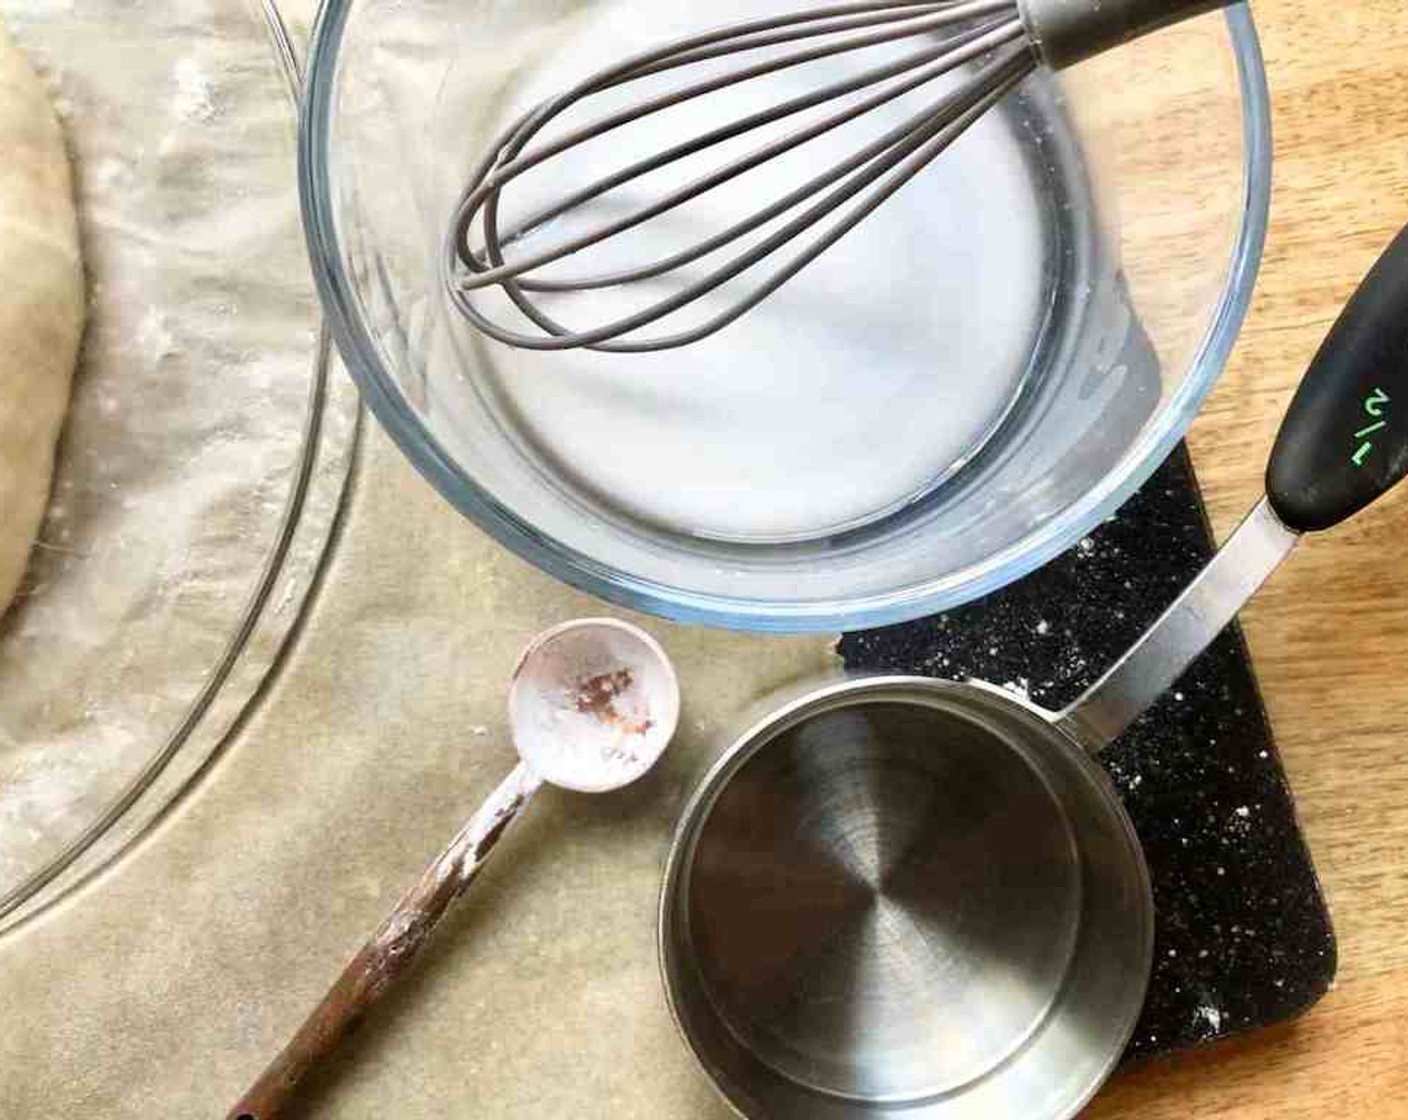 step 10 Using a fork, blend Corn Starch (1/2 tsp) with a small amount of water to form a paste. Add Water (1/2 cup) and whisk with a fork. Boil until the mixture appears glassy.